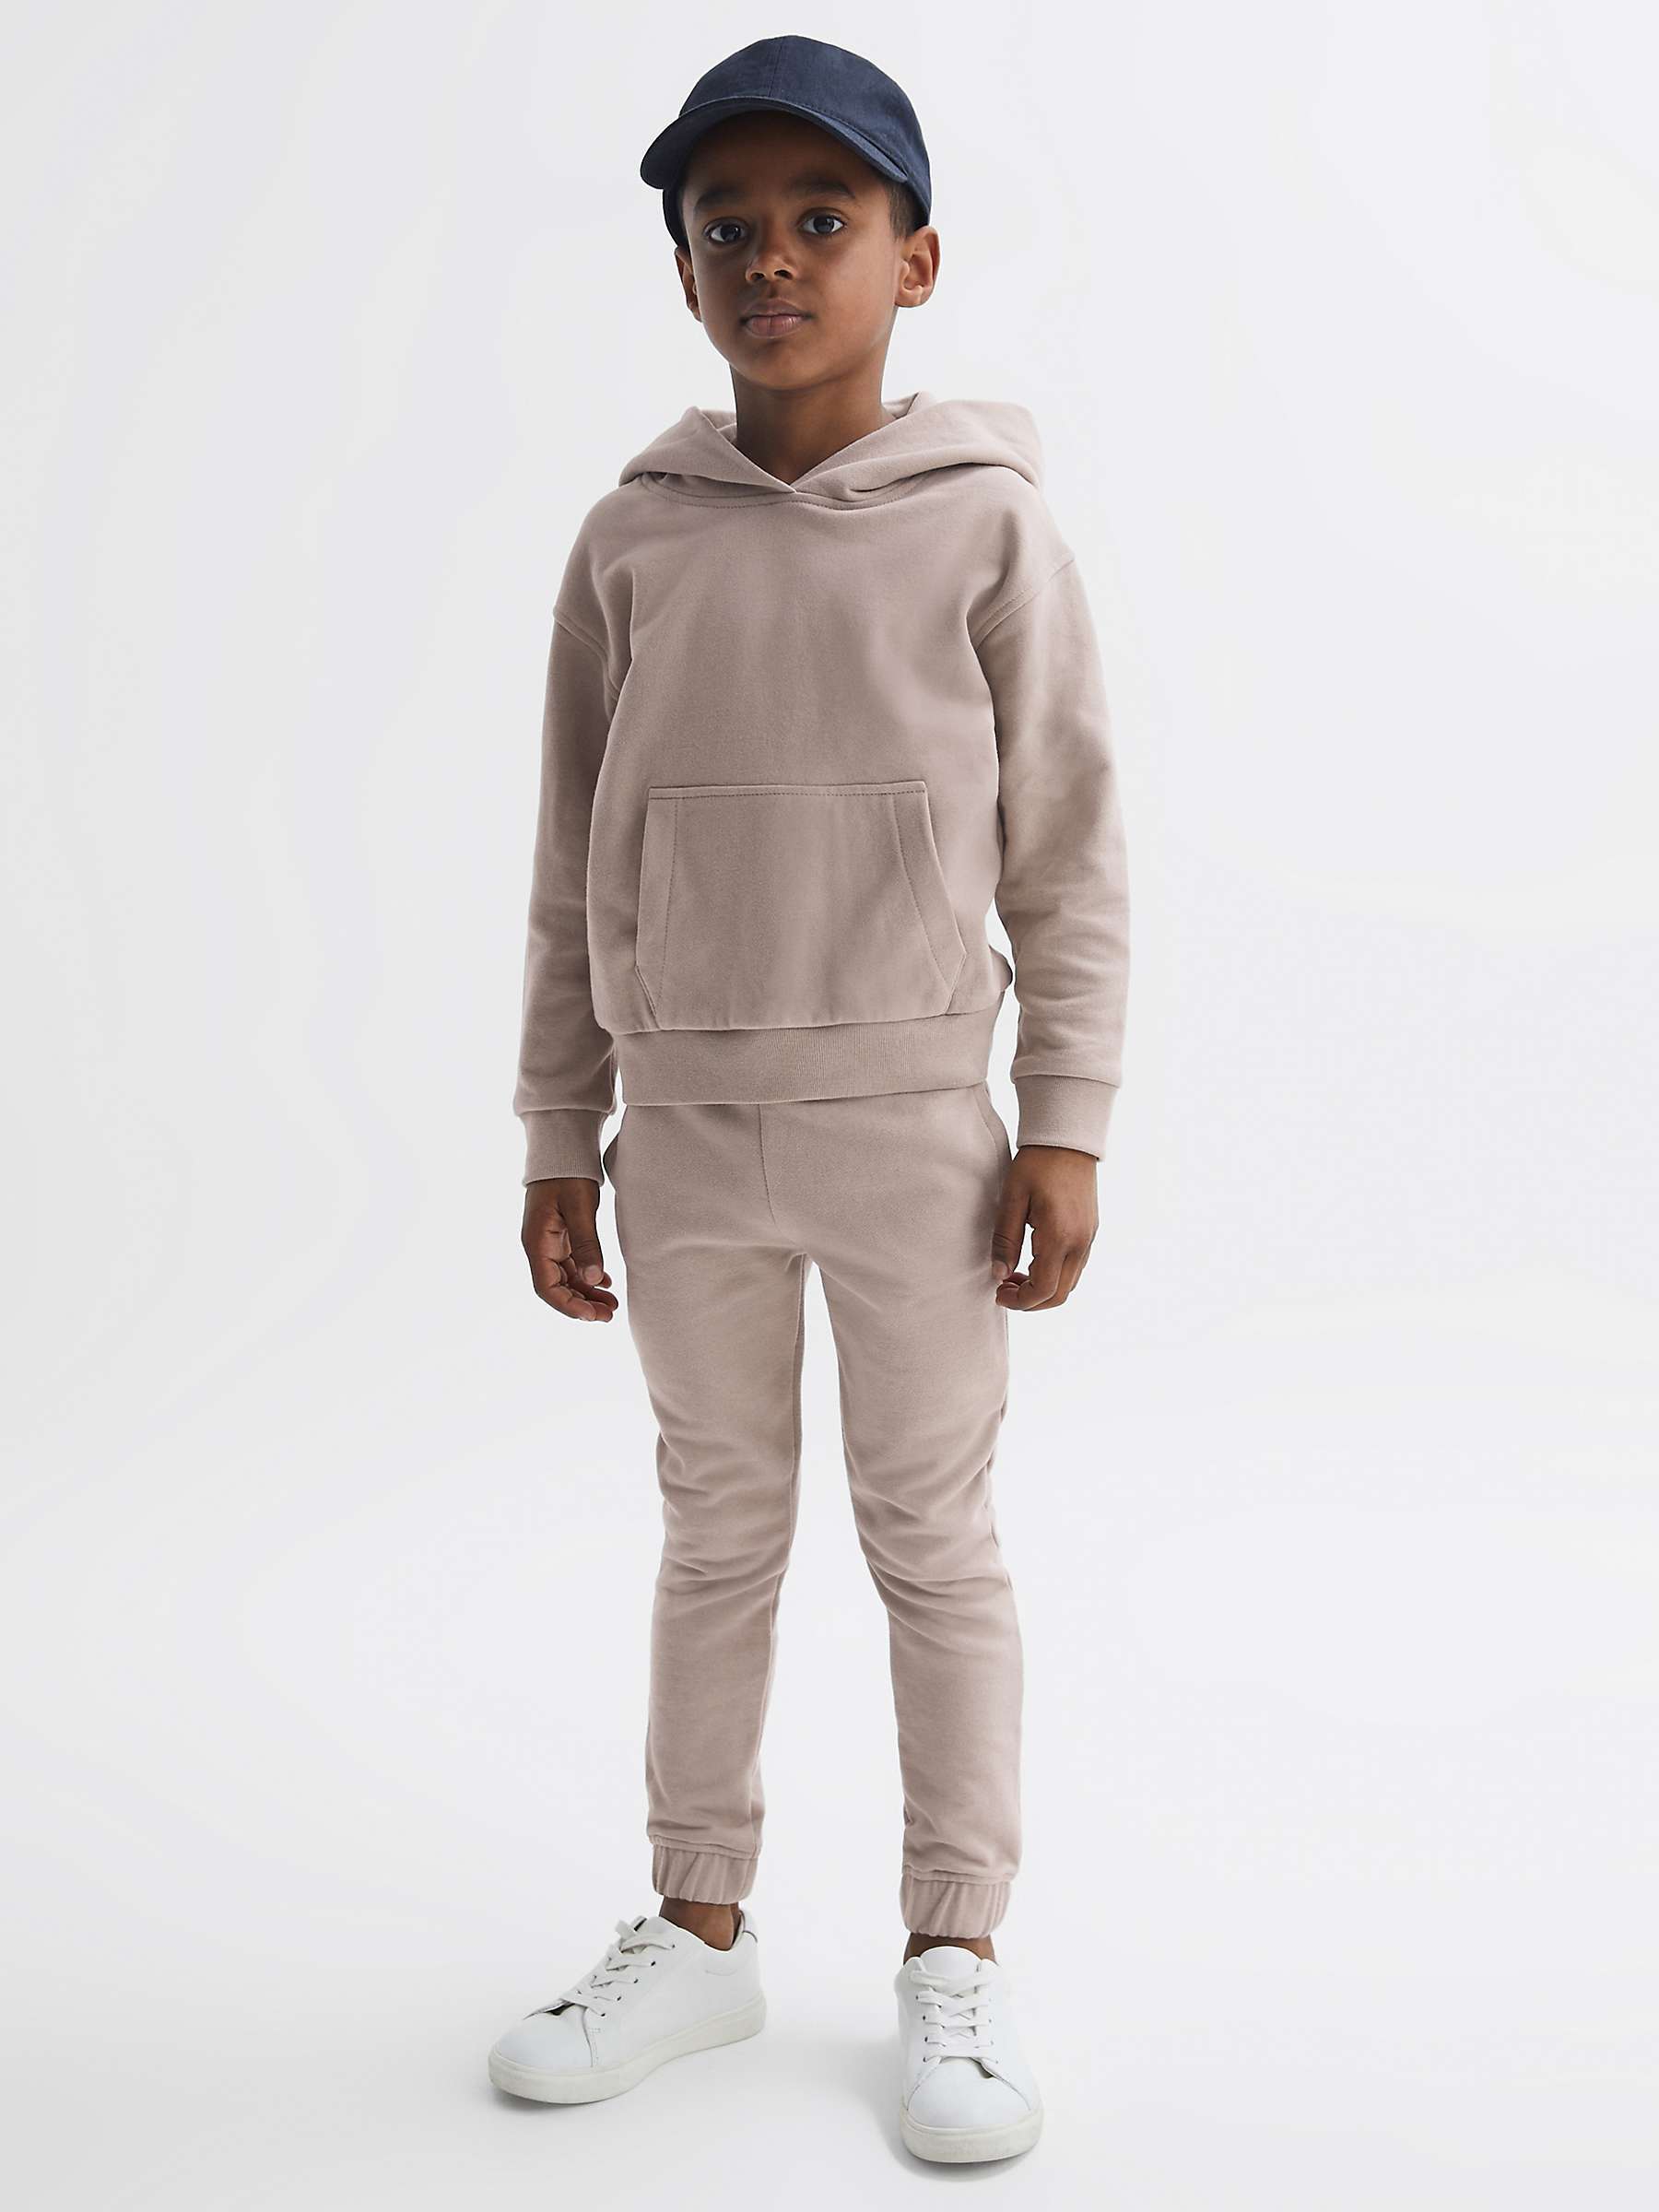 Reiss Kids' Ali Cotton Jersey Joggers, Taupe at John Lewis & Partners